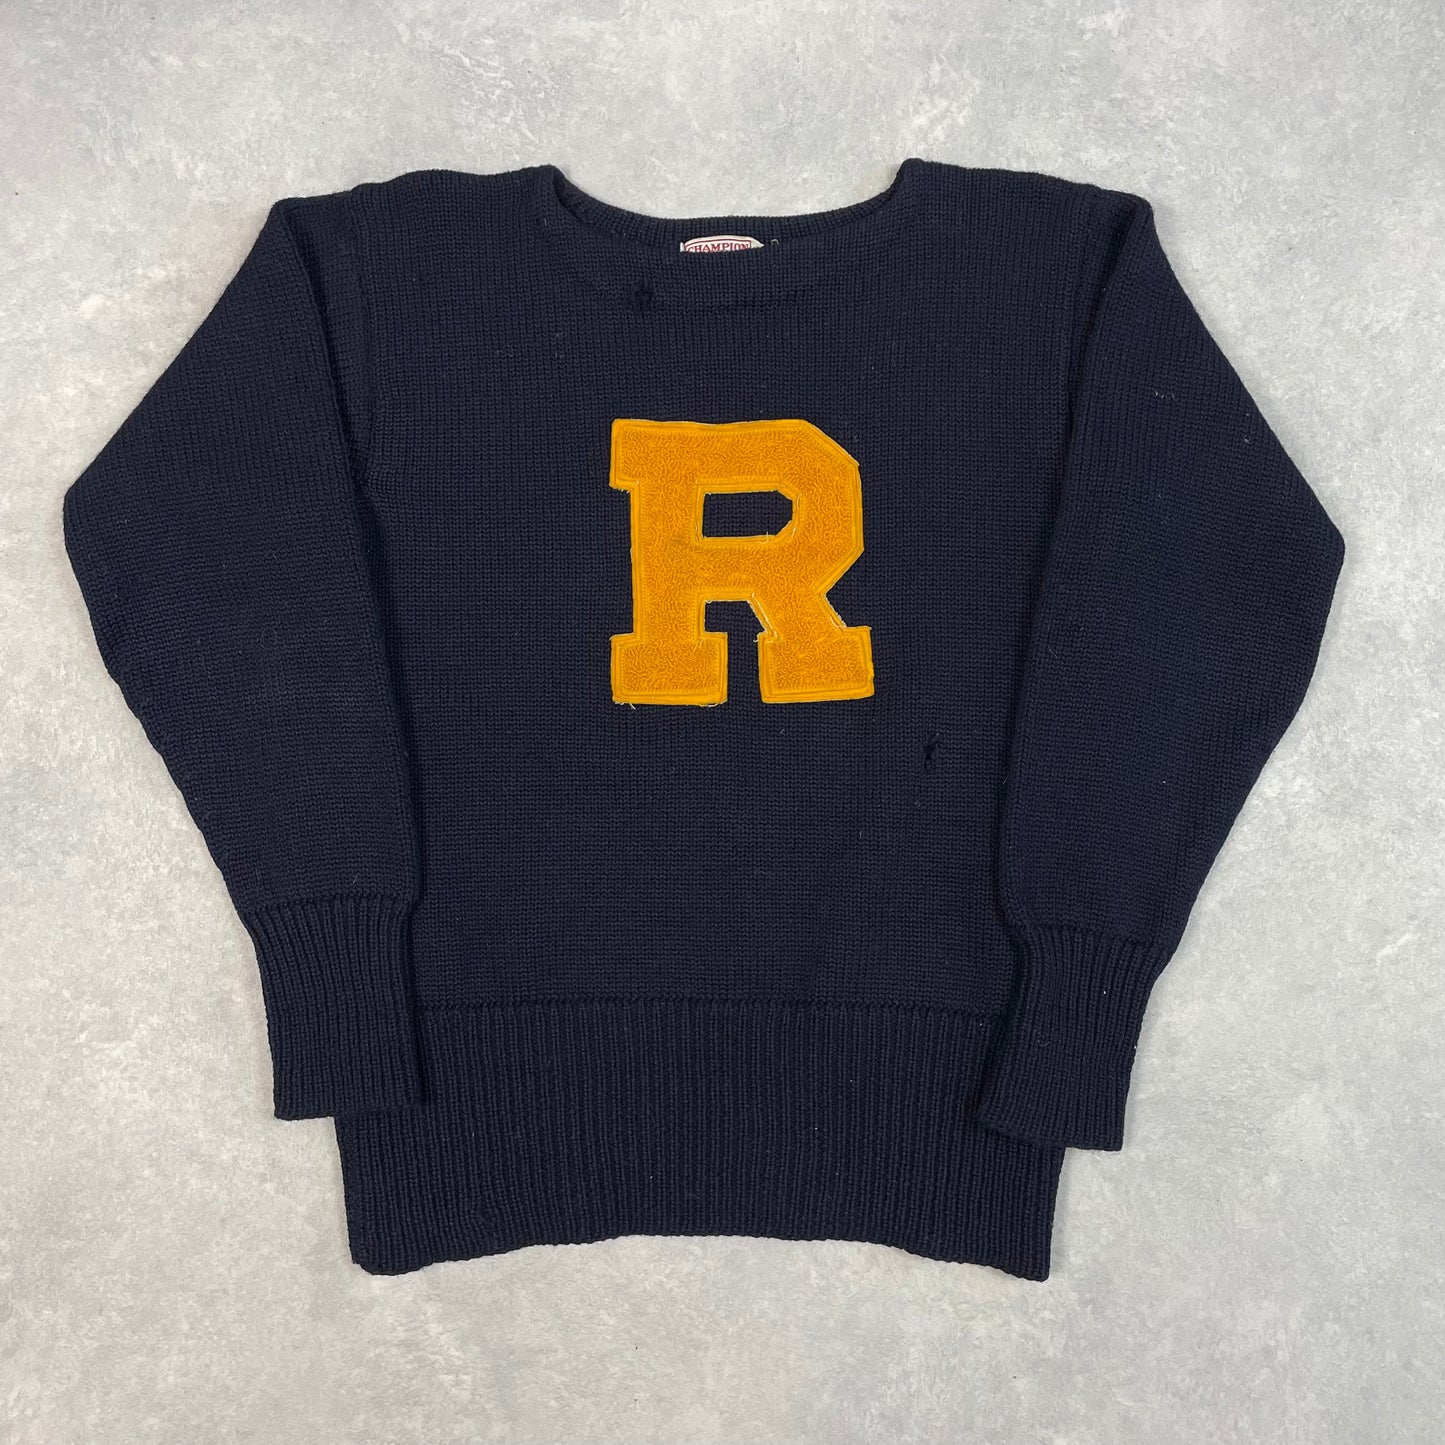 Vintage Champion Sweater Letterman University of Rochester Made in USA 50’s/60’s